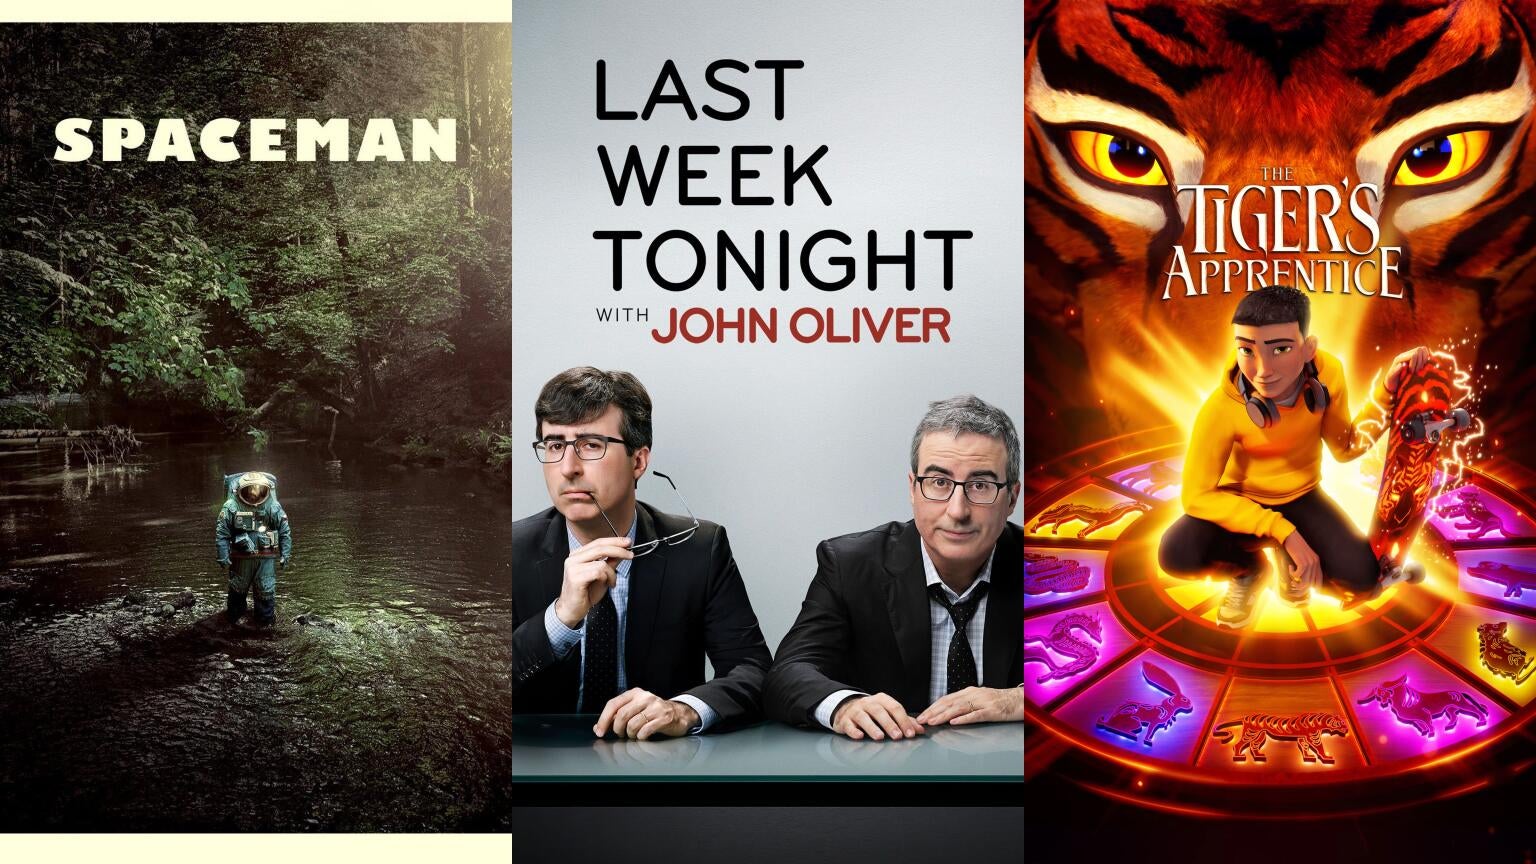 Posts for Netflix's "Spaceman," HBO's "Last Week Tonight With John Oliver," and Paramount+'s "The Tiger's Apprentice"